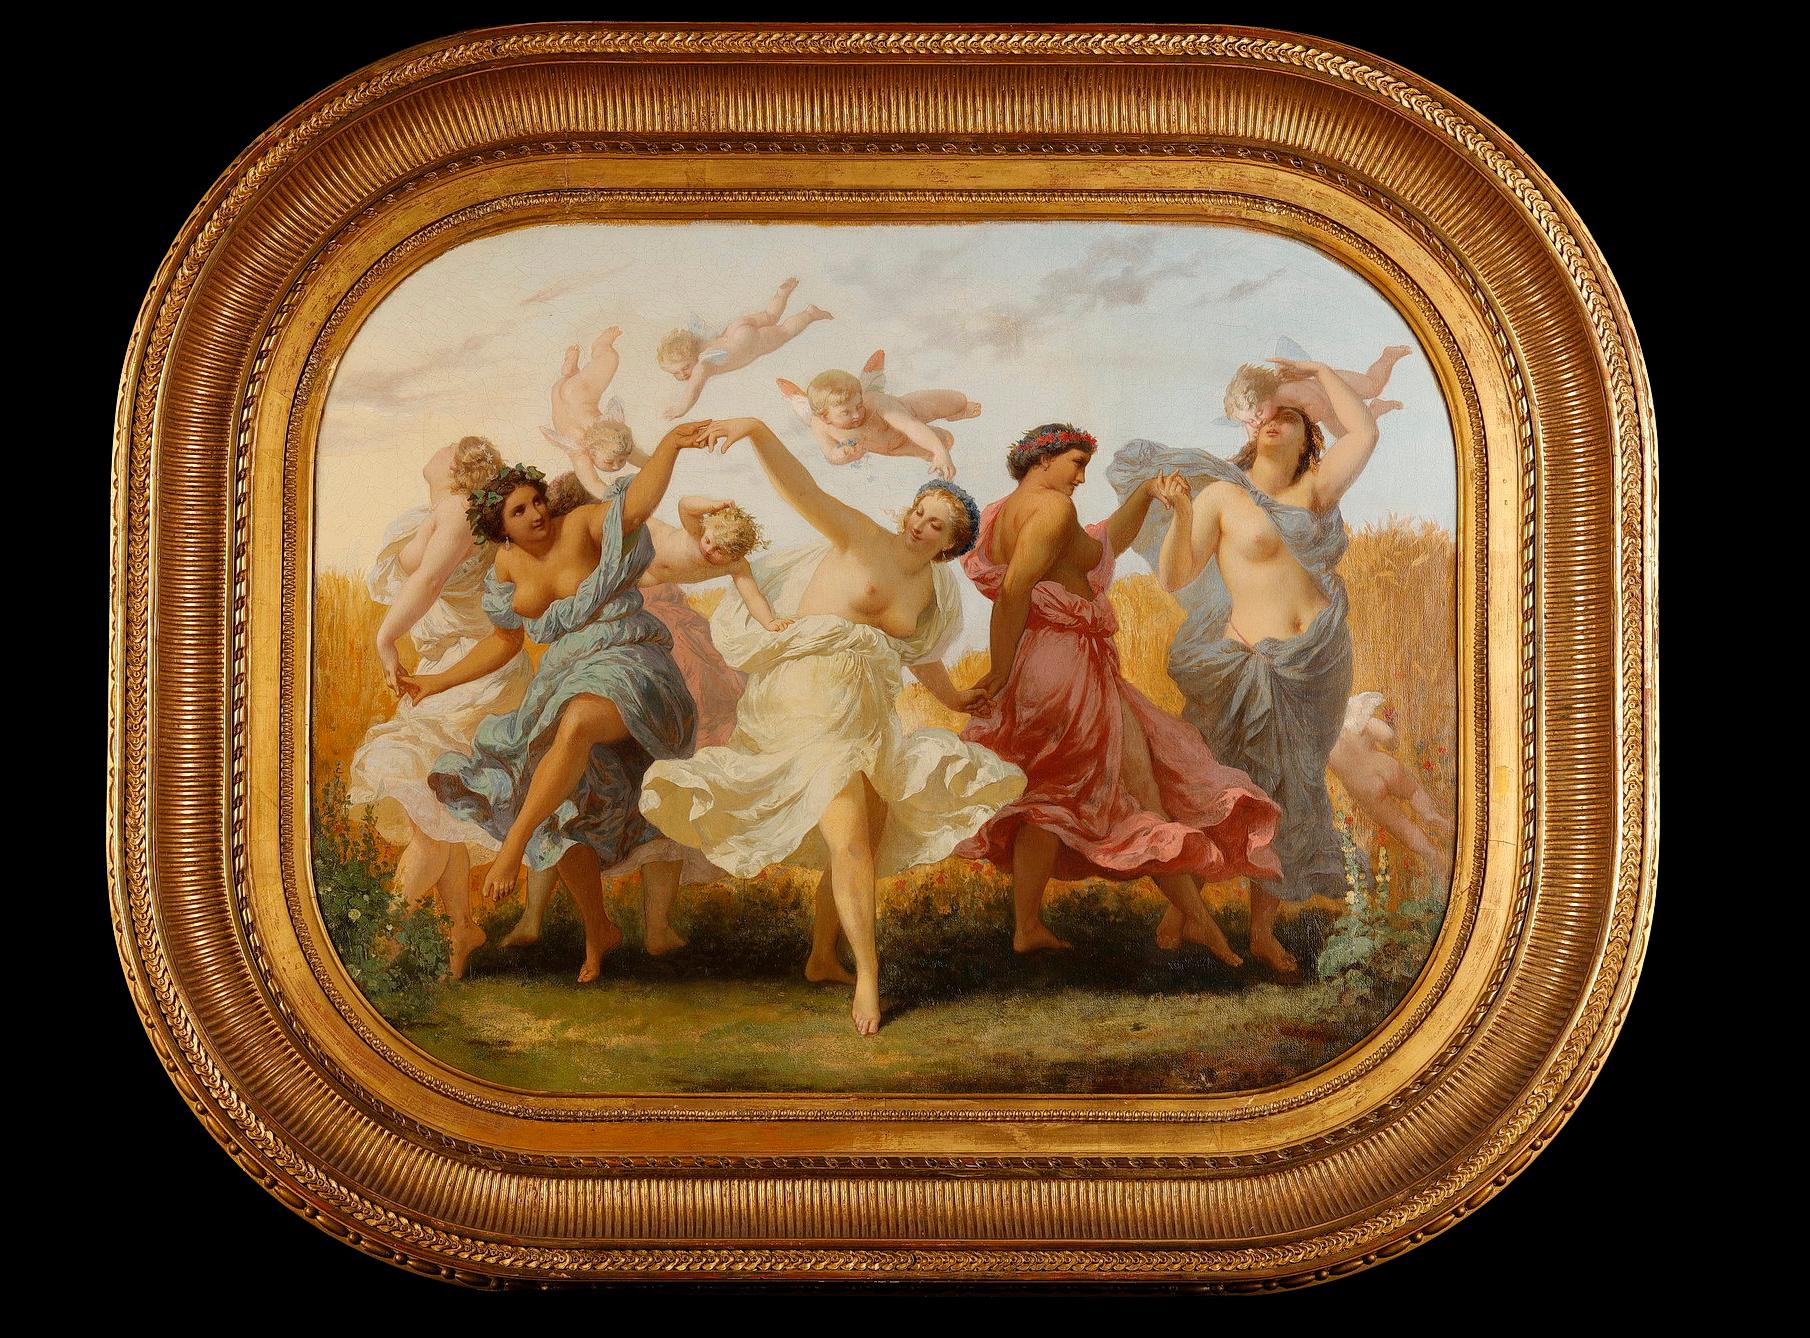 Signed on the bottom right Henry Picou.

Charming mythological scene representing a round of nymphs, symbol of fertility and benevolence, wearing crowns of flowers and dancing in the middle of a wheat field. They are accompanied by playful winged